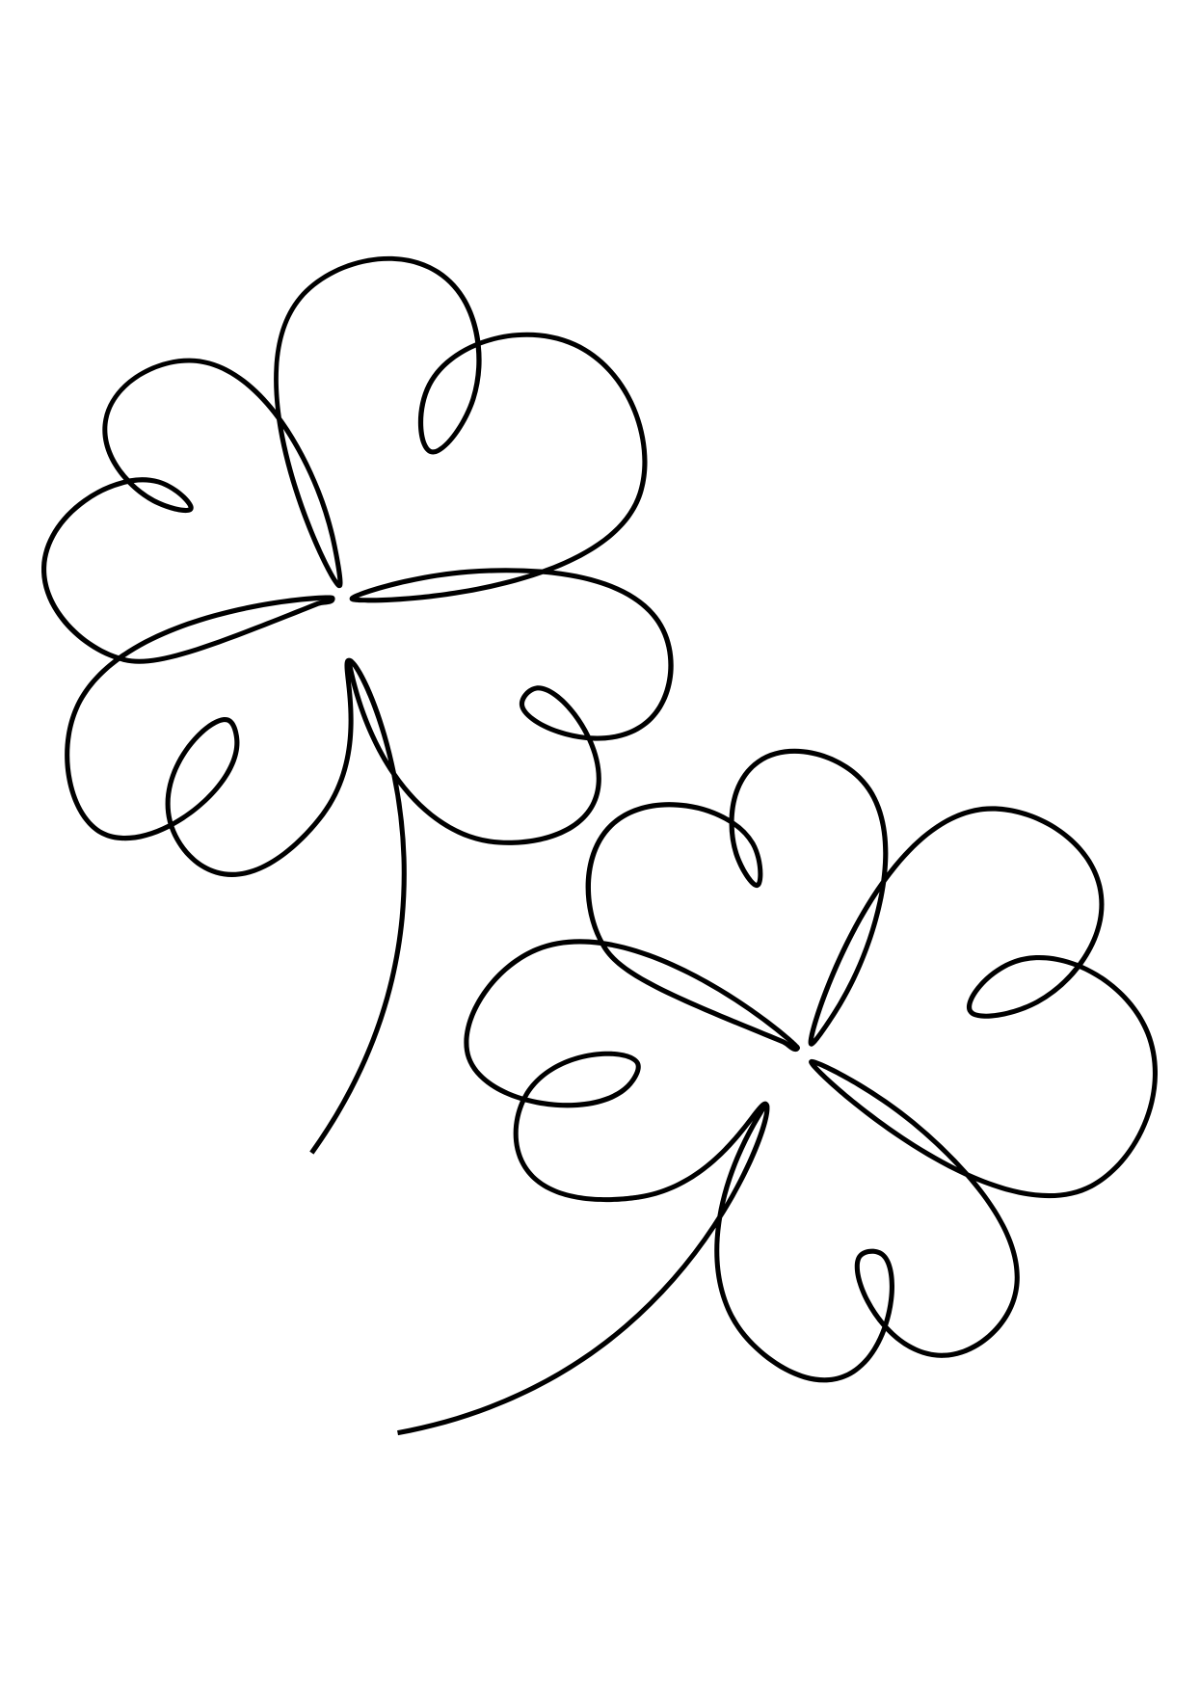 Free Shamrock Outline Drawing Template